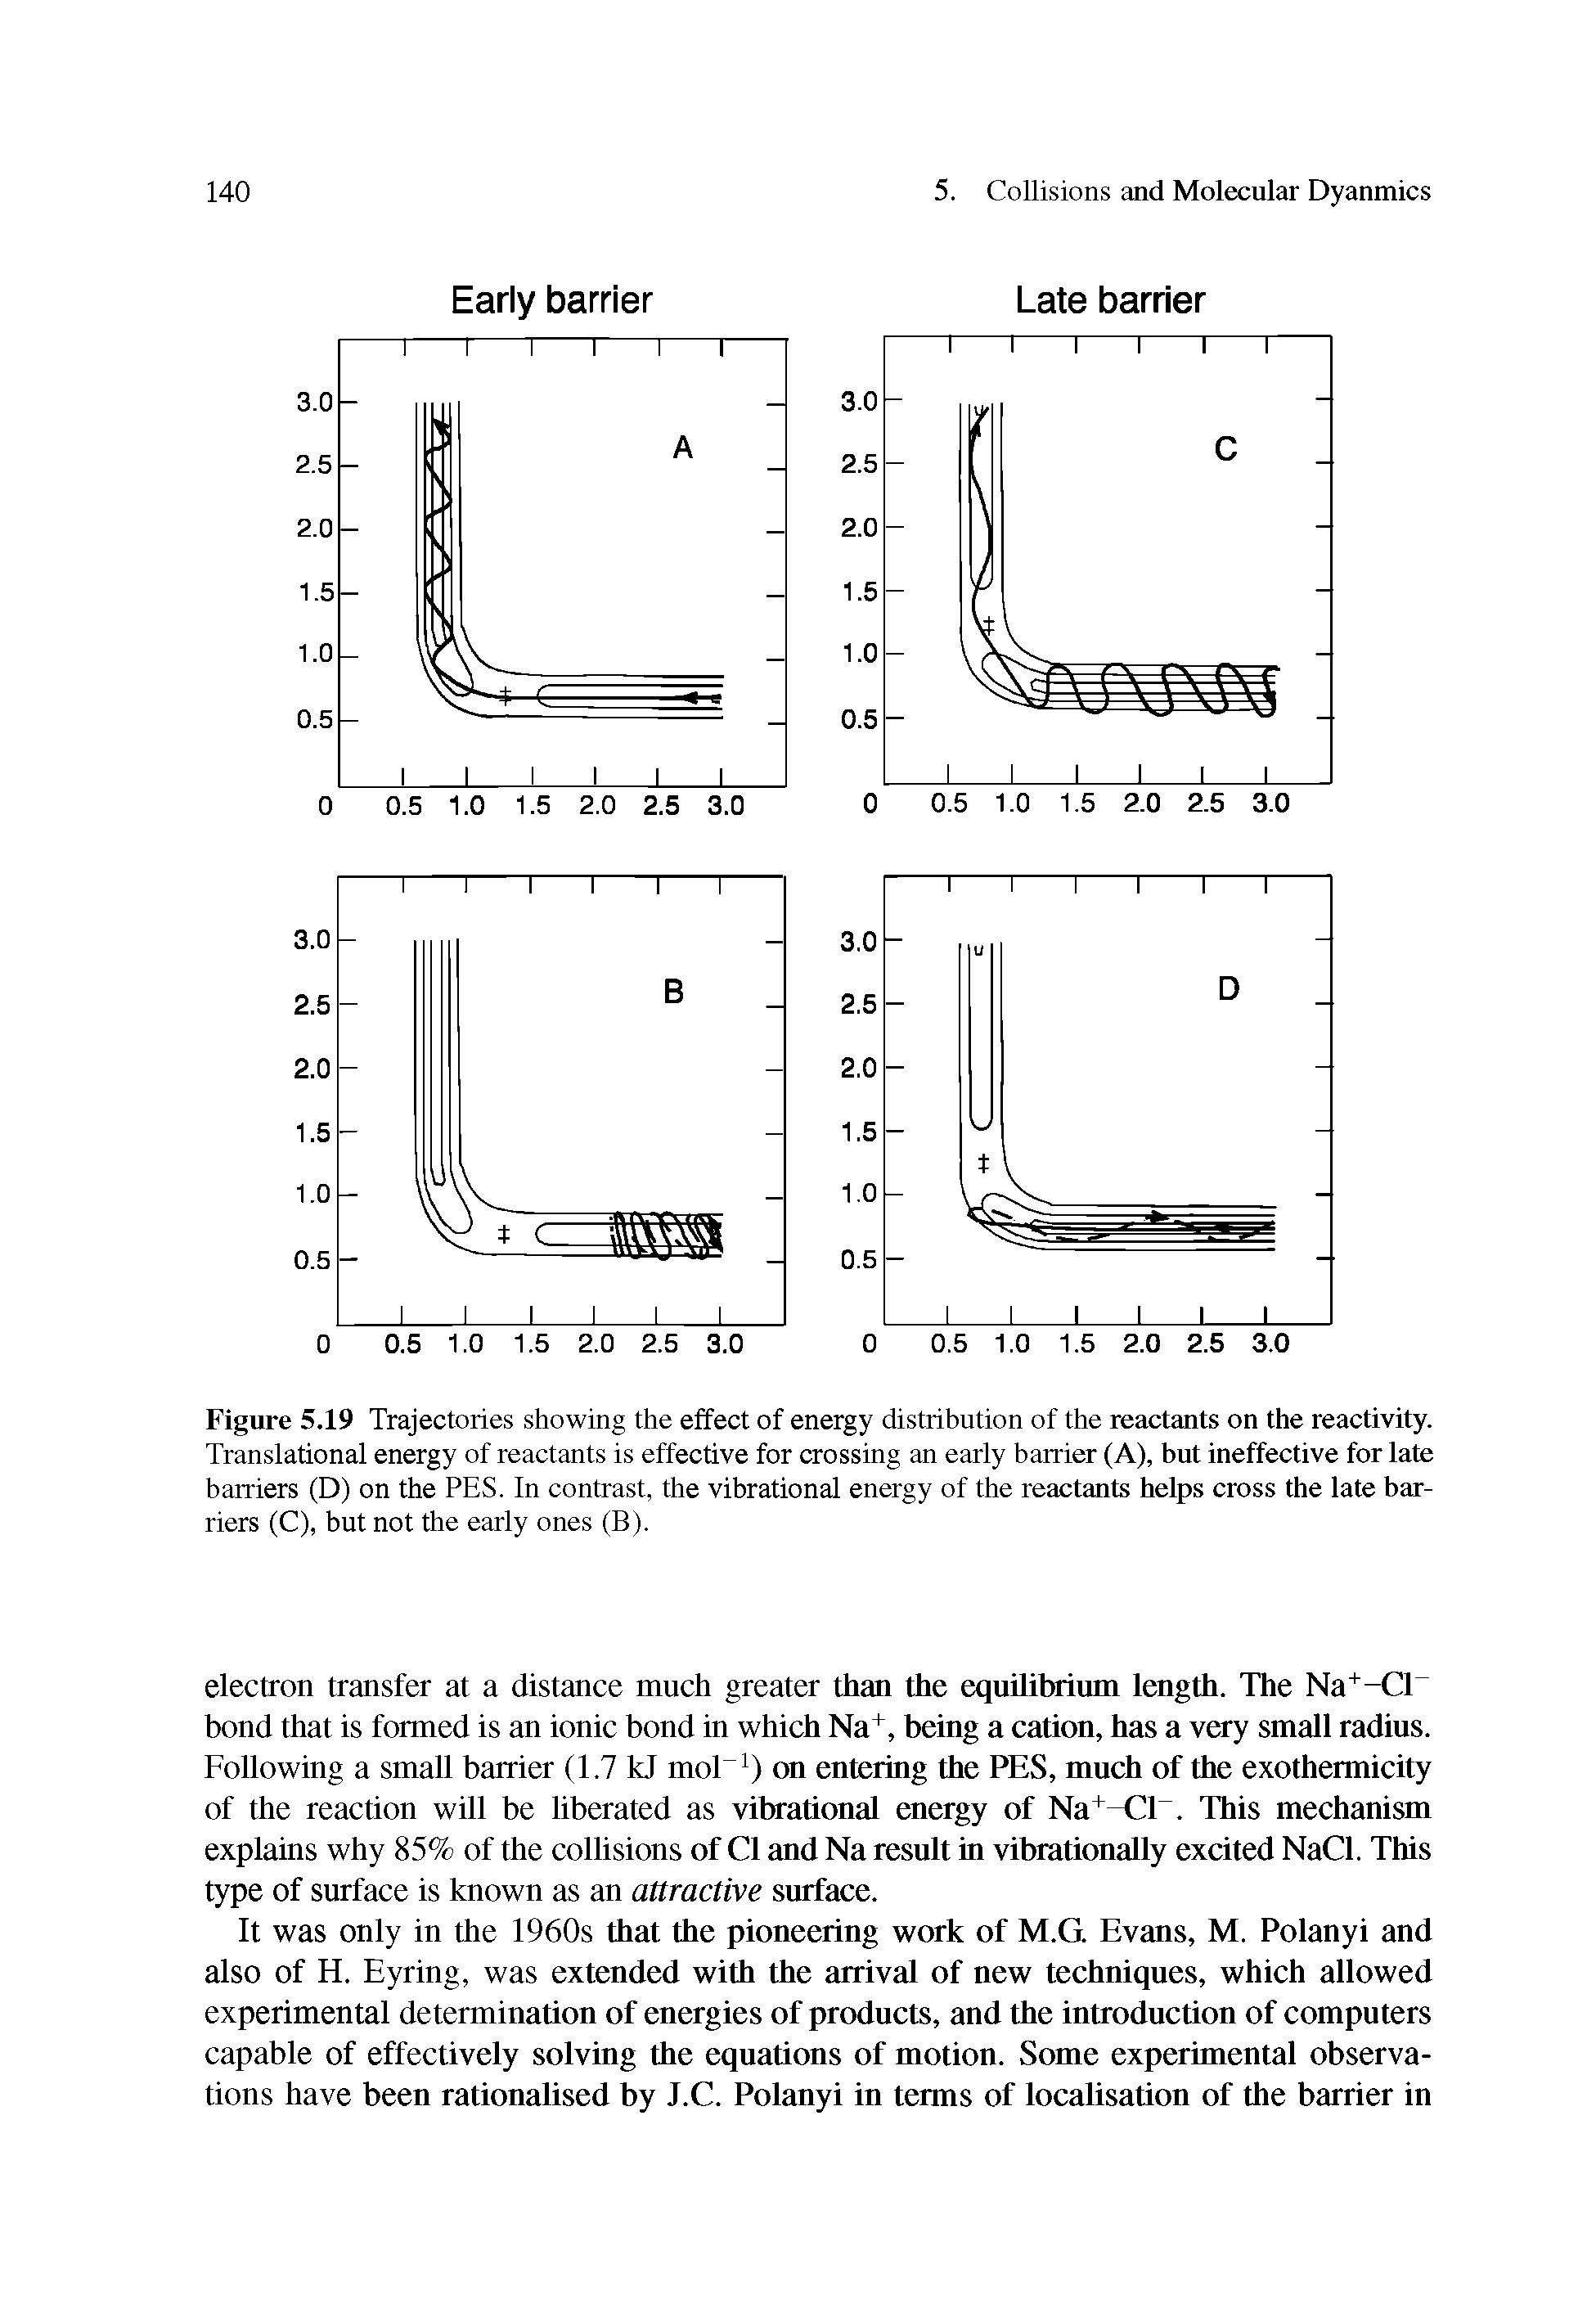 Figure 5.19 Trajectories showing the effect of energy distribution of the reactants on the reactivity. Translational energy of reactants is effective for crossing an early barrier (A), but ineffective for late barriers (D) on the PES. In contrast, the vibrational energy of the reactants helps cross the late barriers (C), but not the early ones (B).